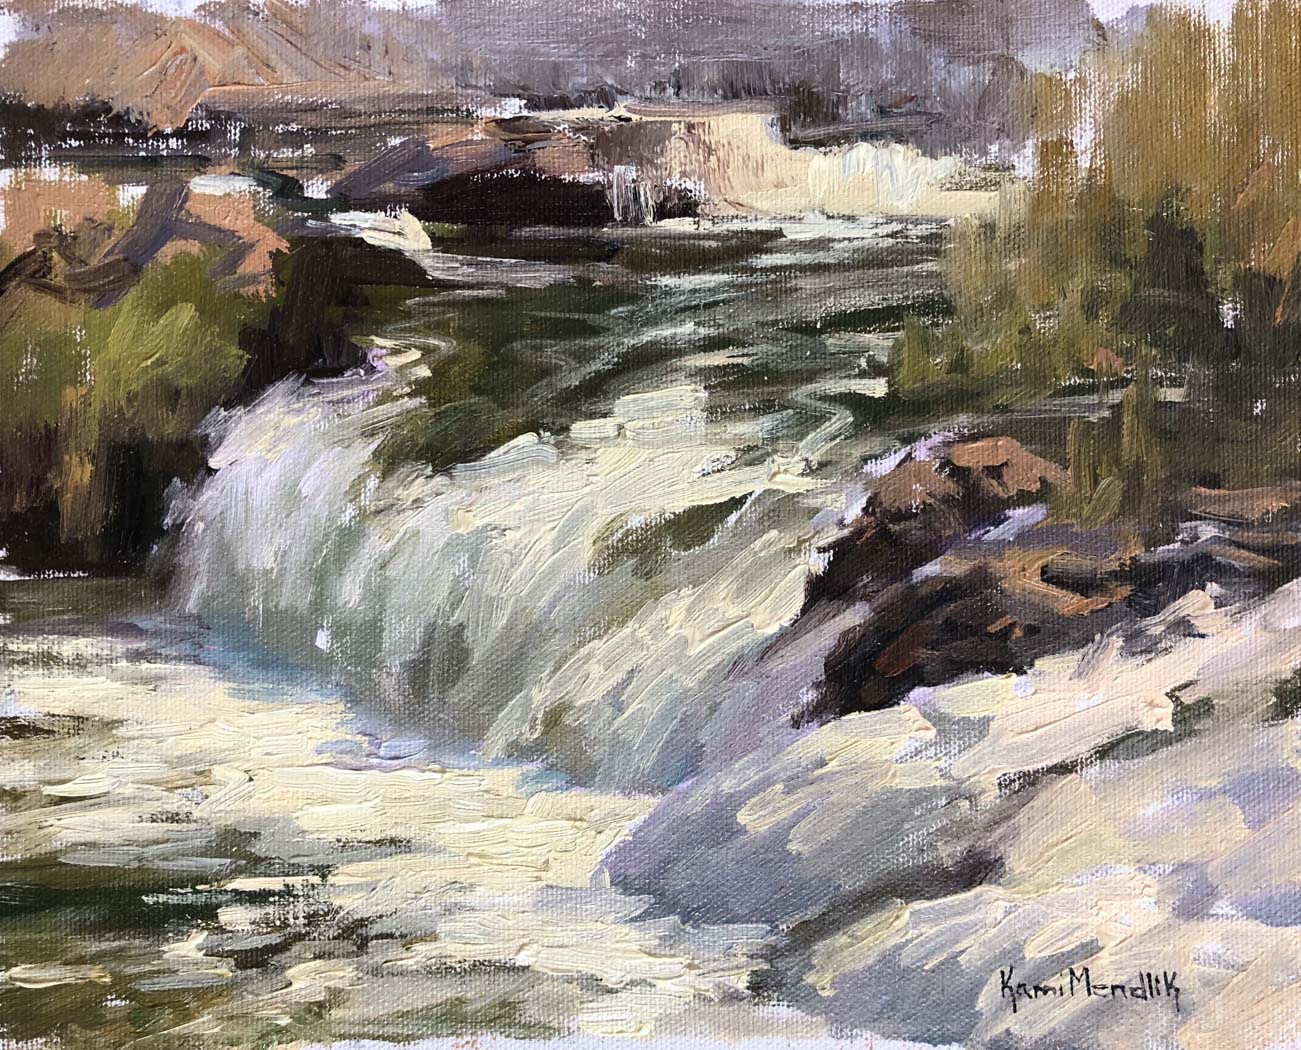 Canvas of a waterfall